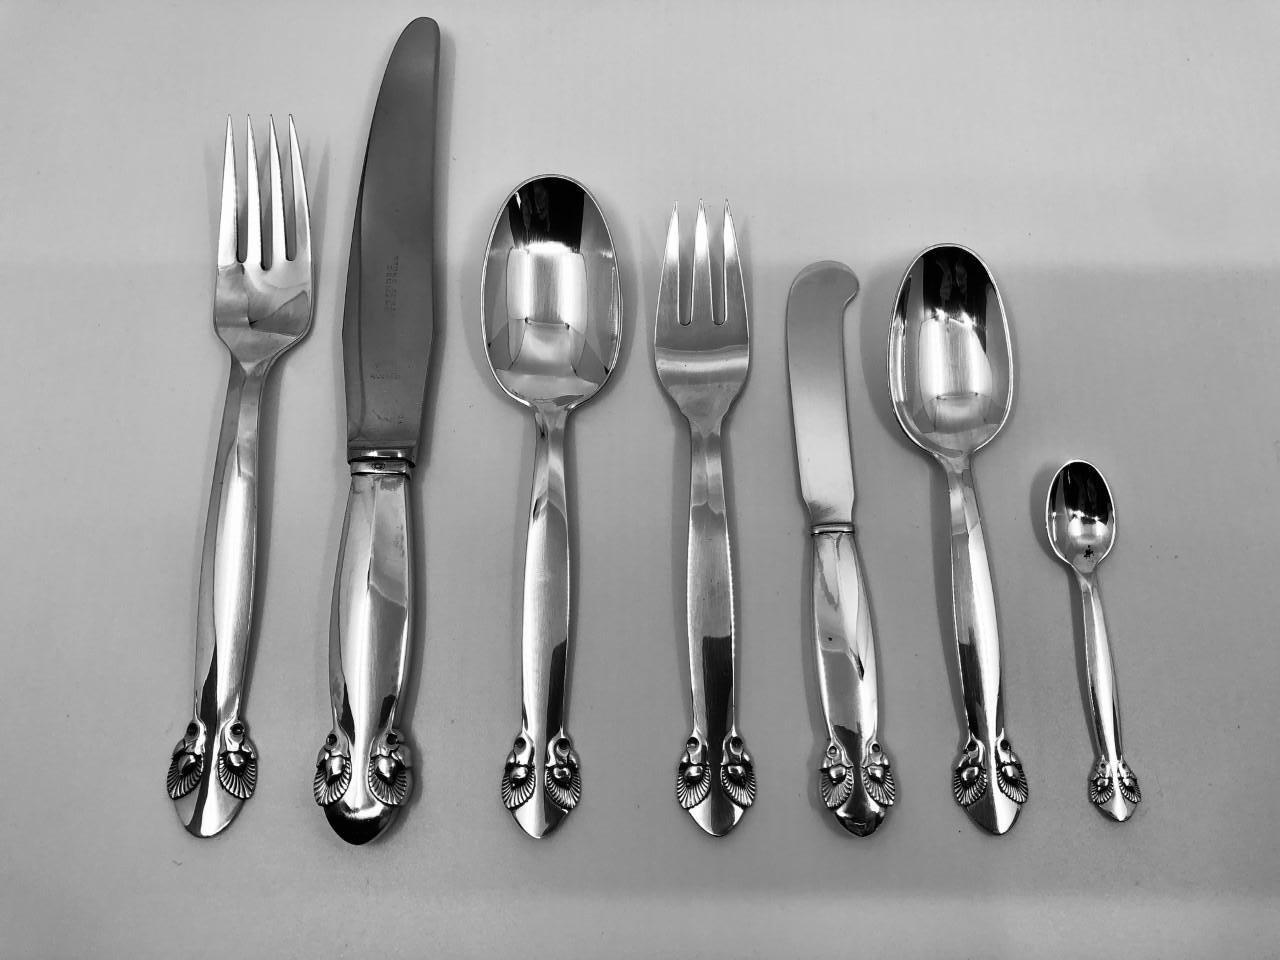 A sought after Georg Jensen sterling silver cutlery service in the Bittersweet pattern, called in Danish 